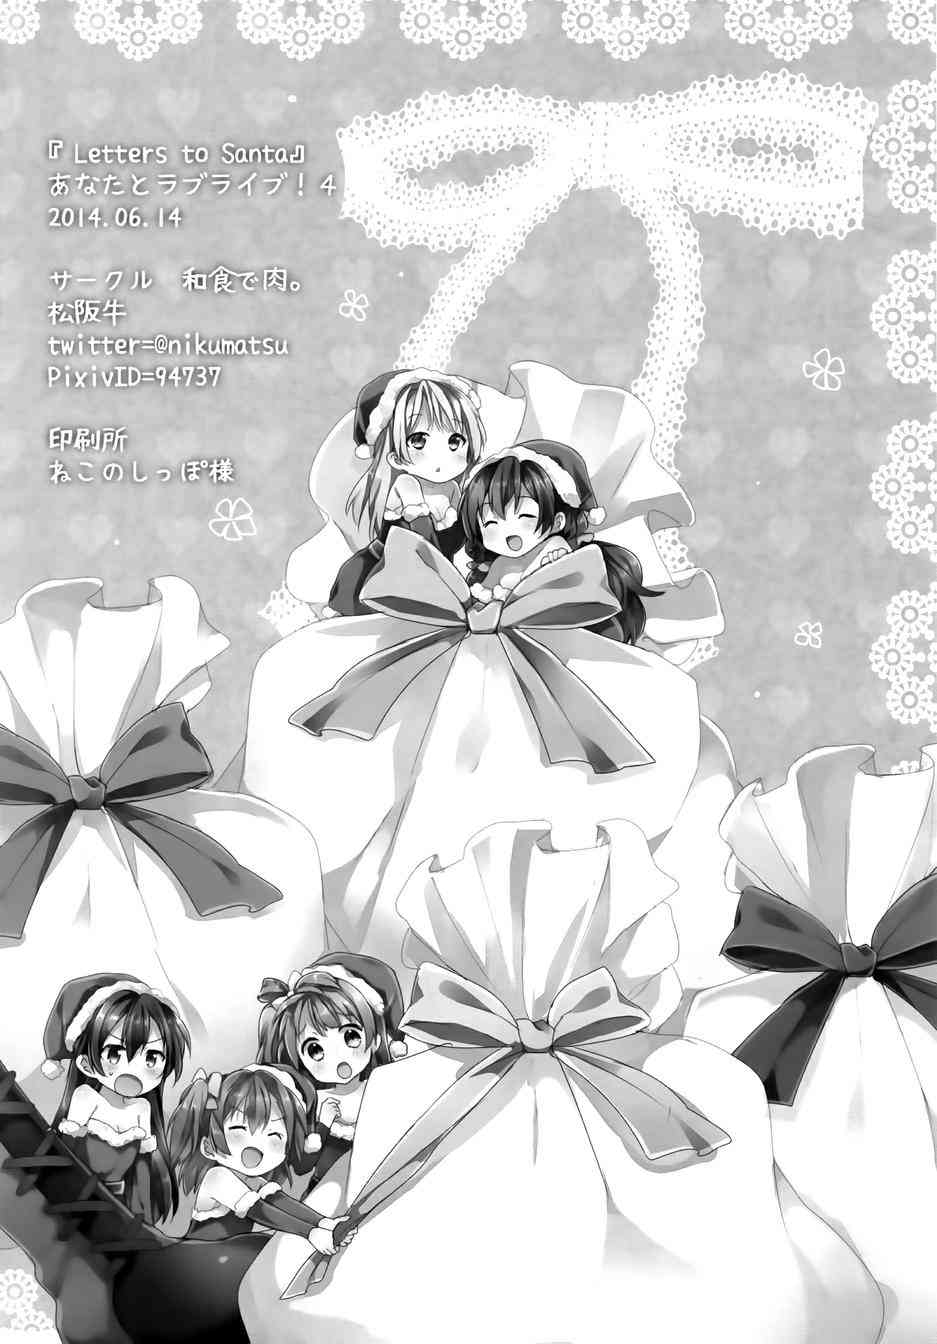 LoveLive - letters to santa - 2